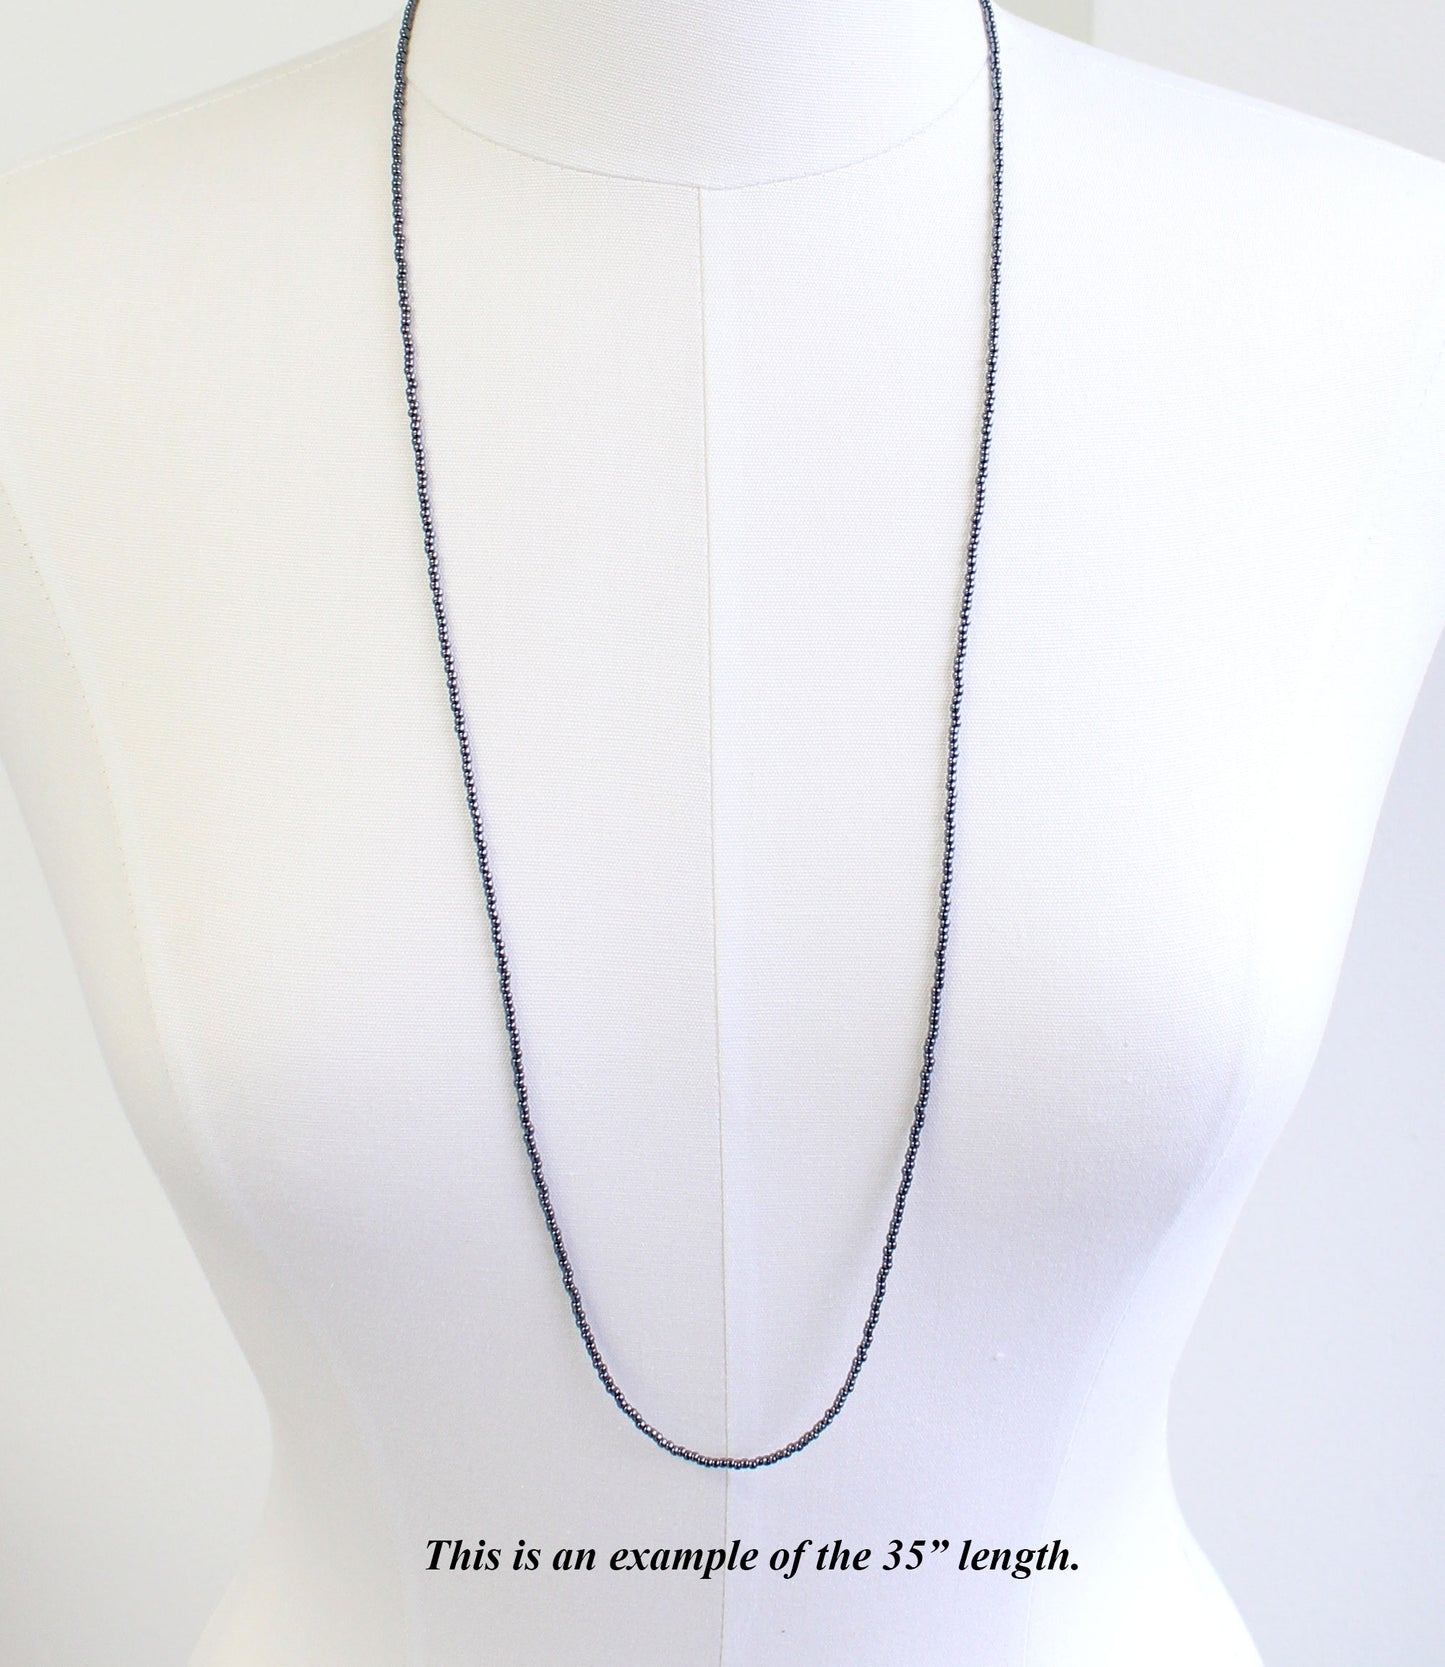 Hematite Glass Seed Bead Necklace